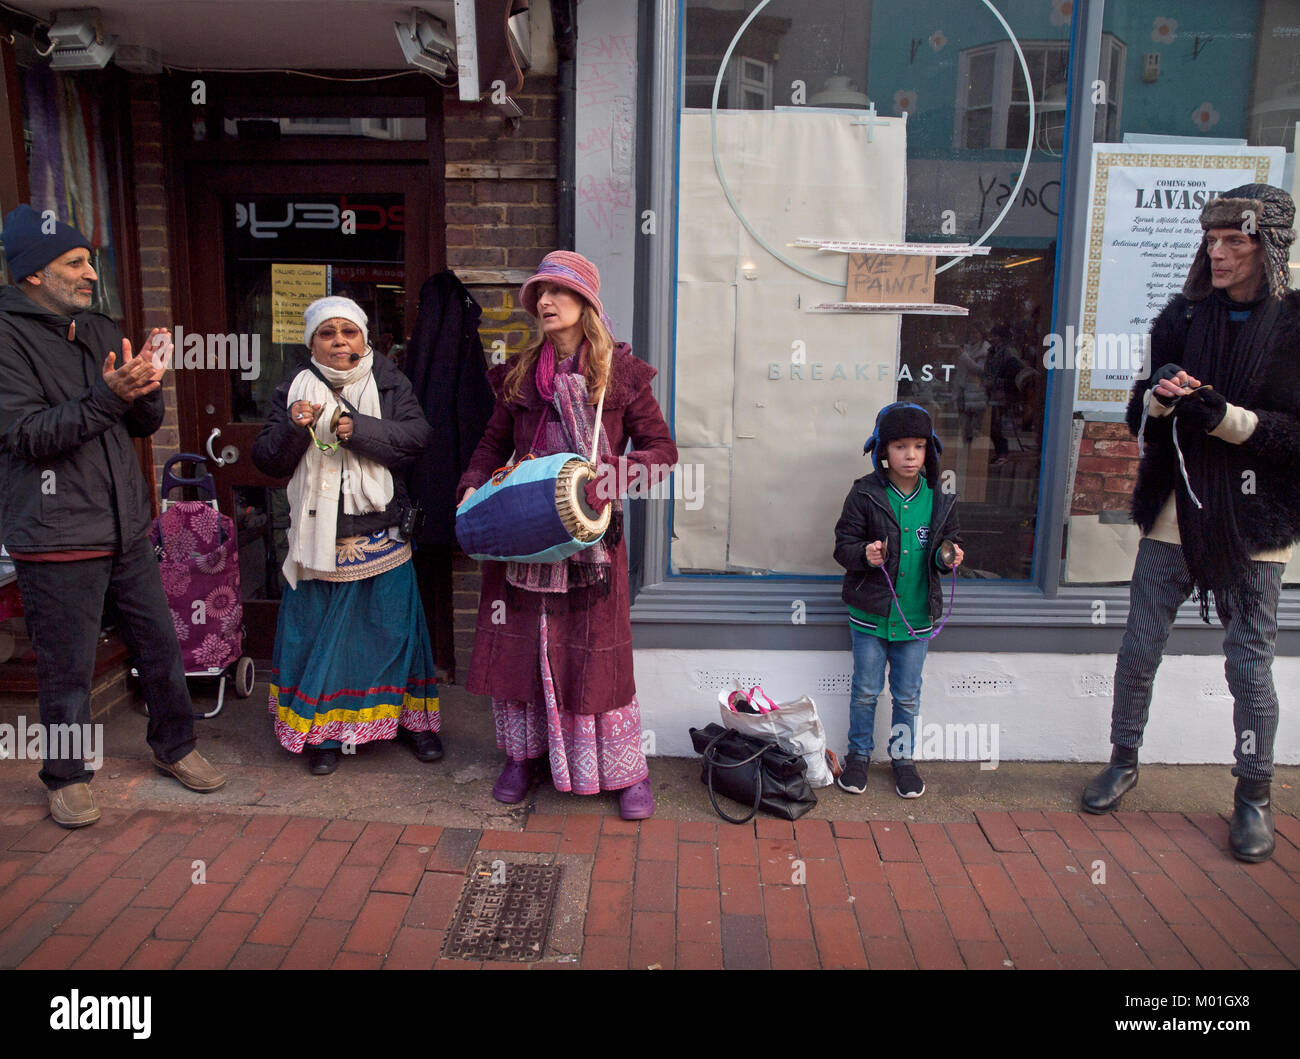 Members of the Hare Krishna movement chant and make music on a Brighton street Stock Photo